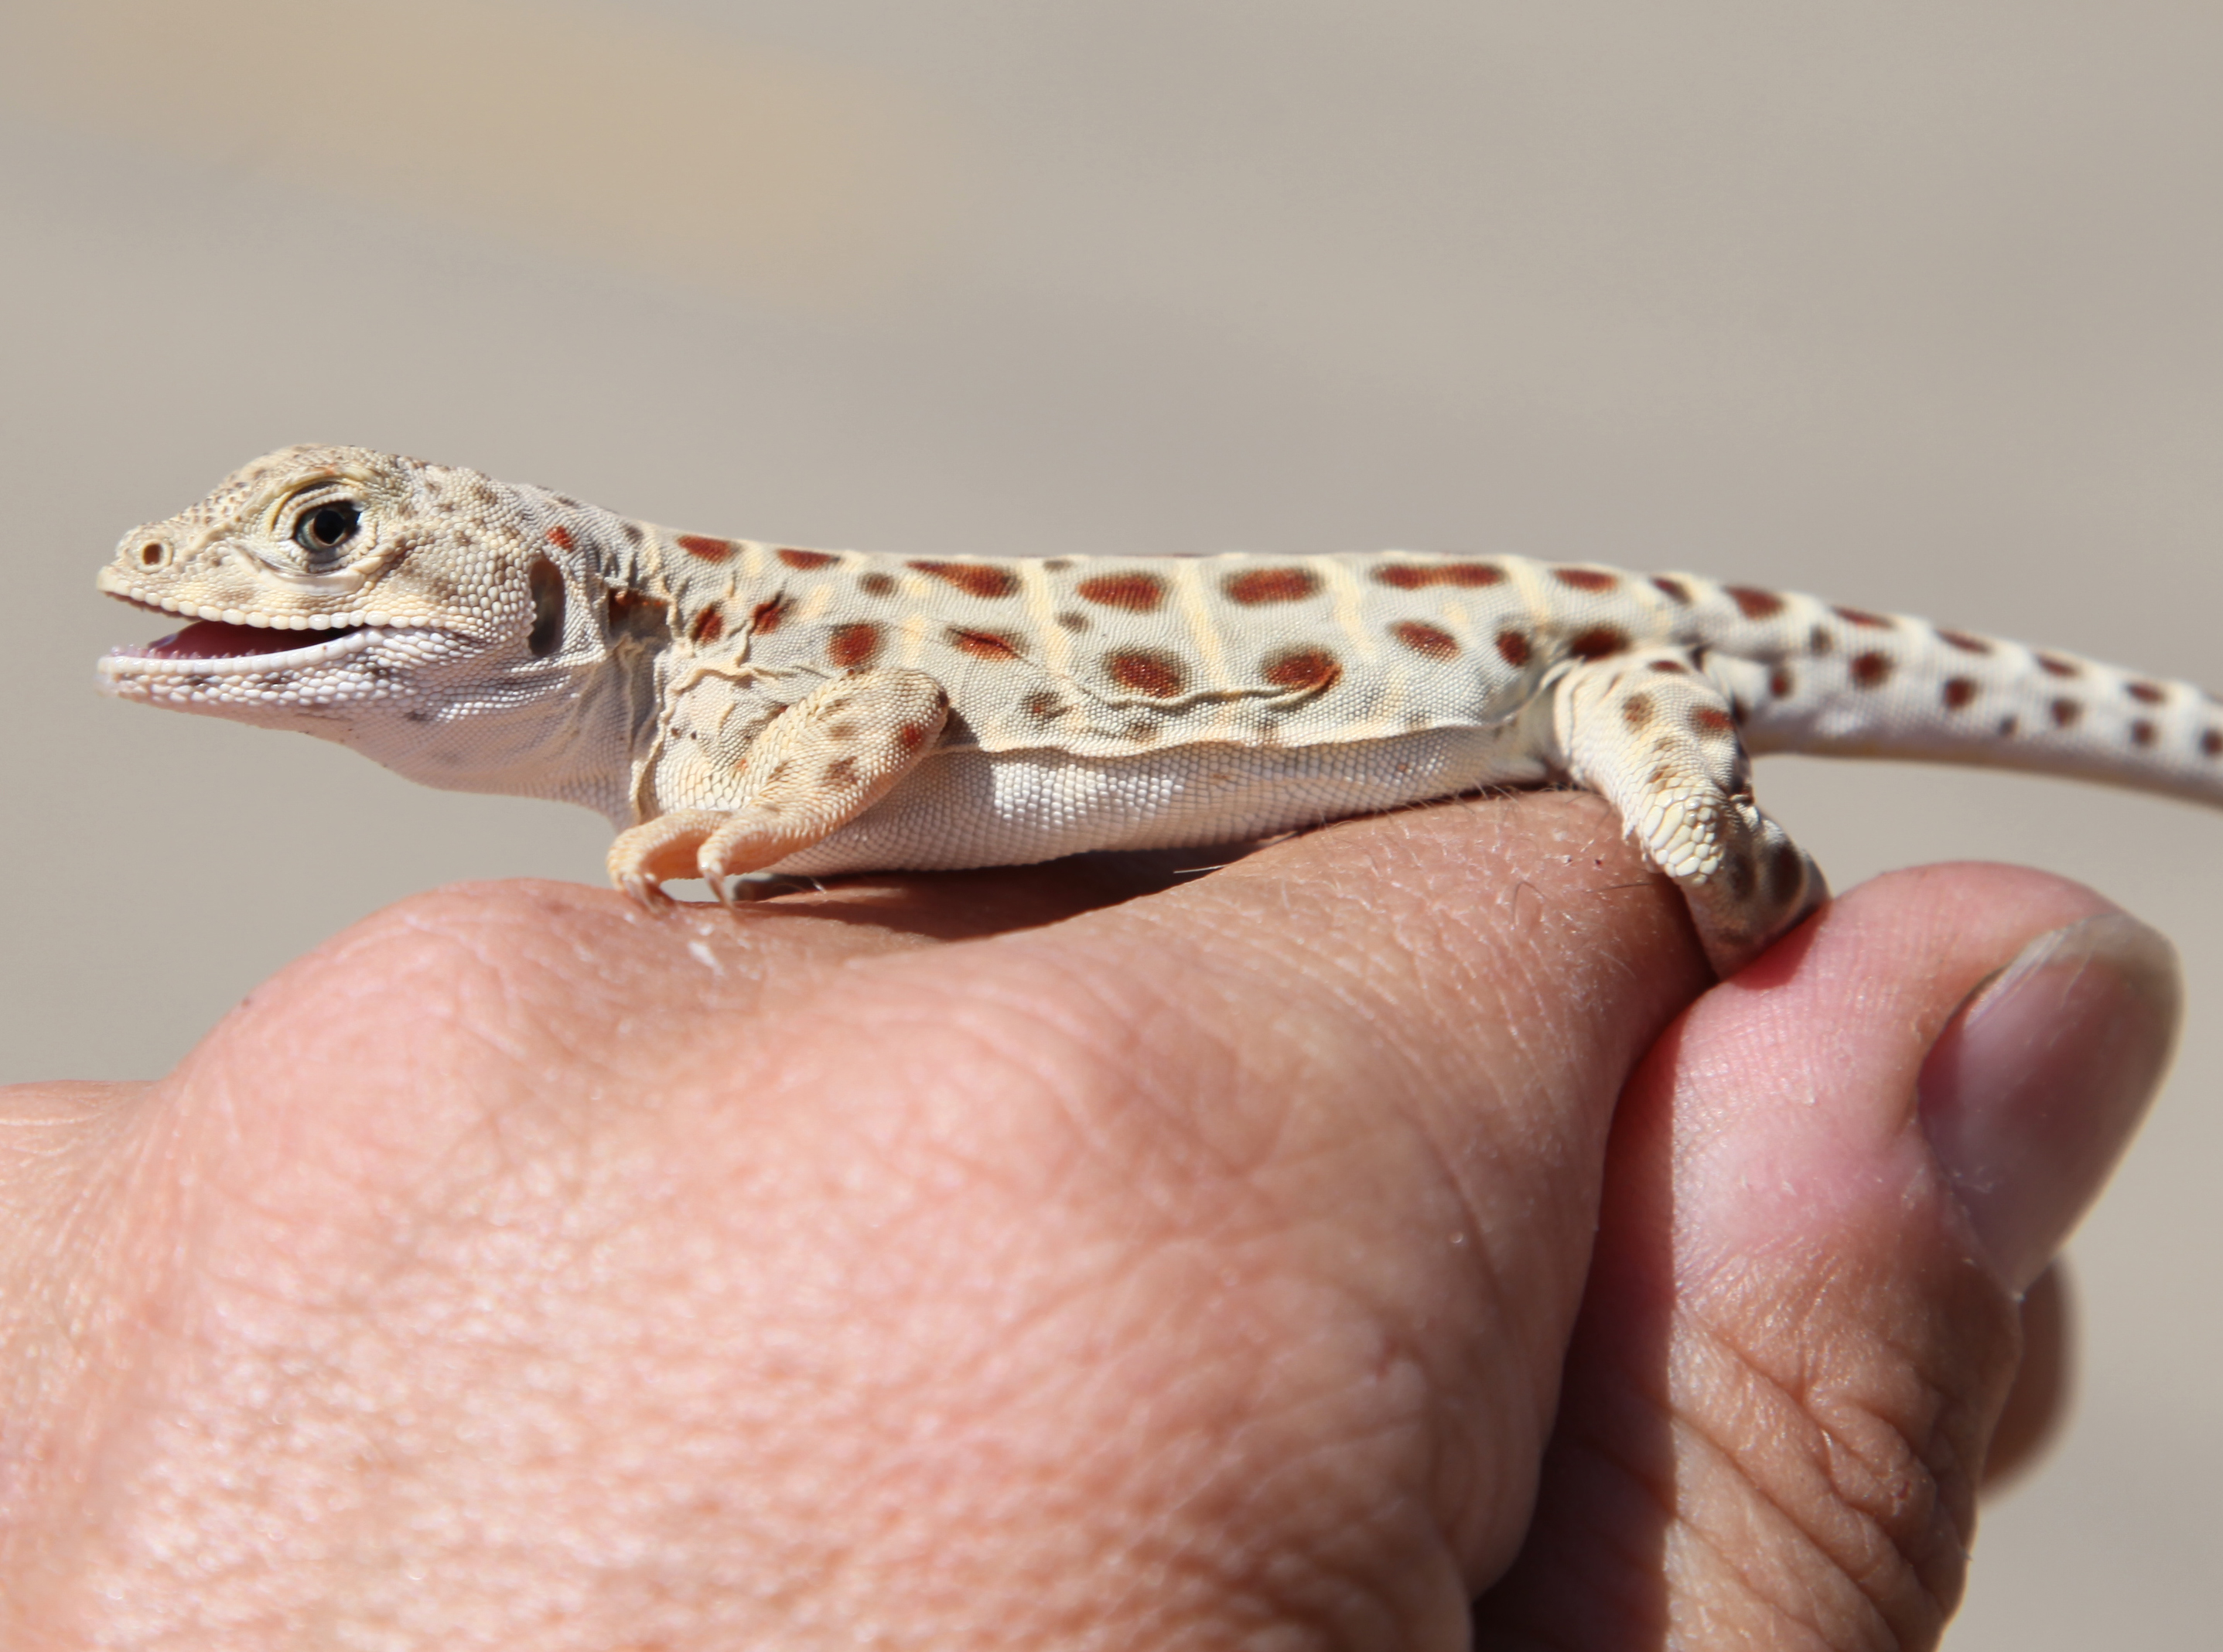 A young lizard with unique markings rests on the hand of a man.